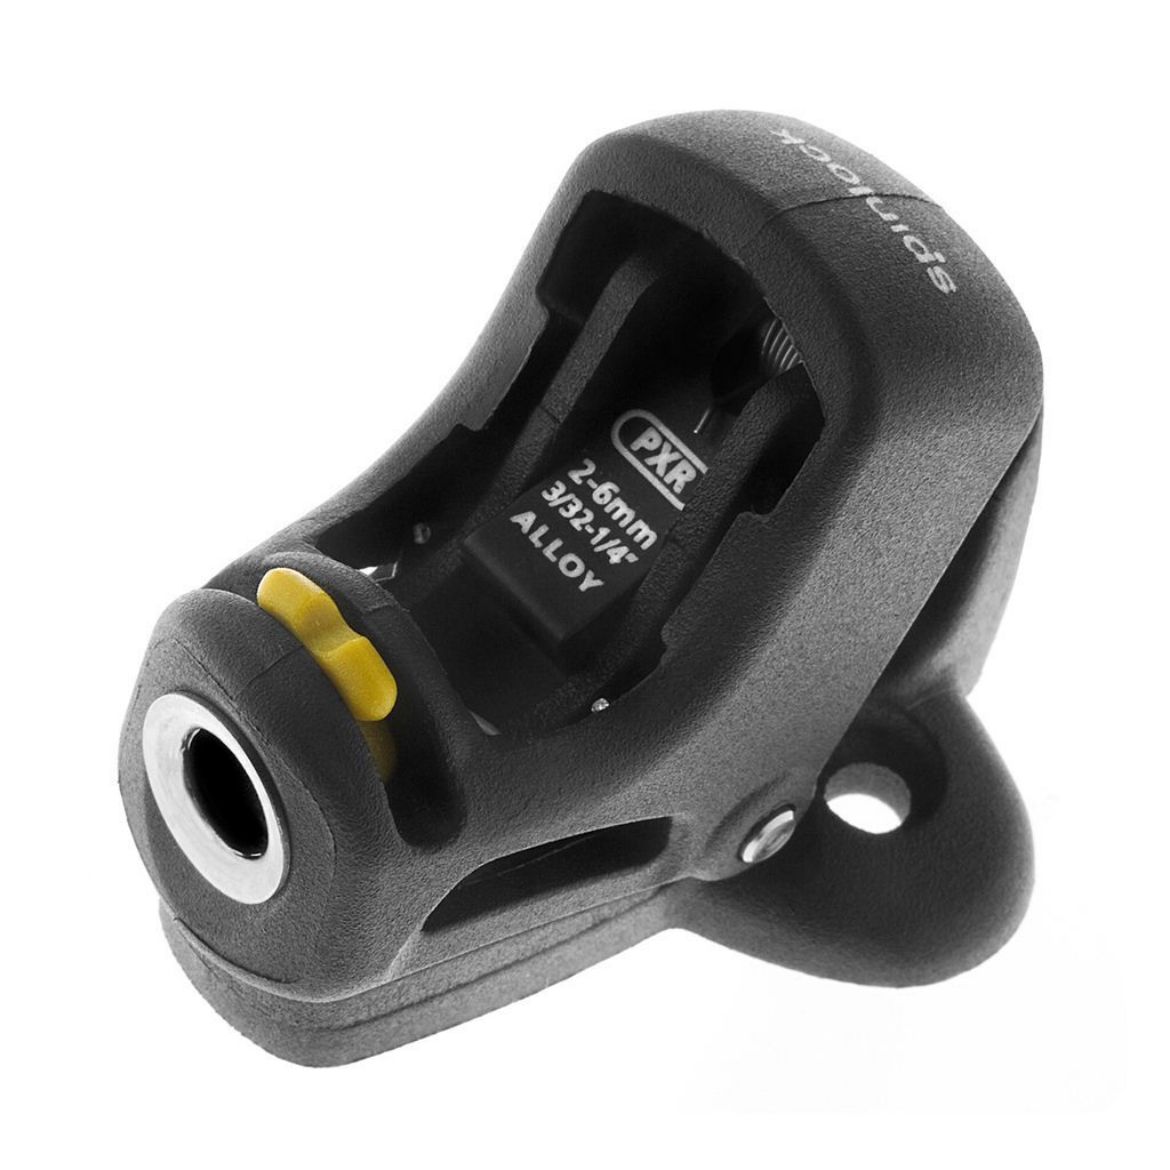 Picture of Spinlock PXR 2-6mm Retro fit Cam Cleat